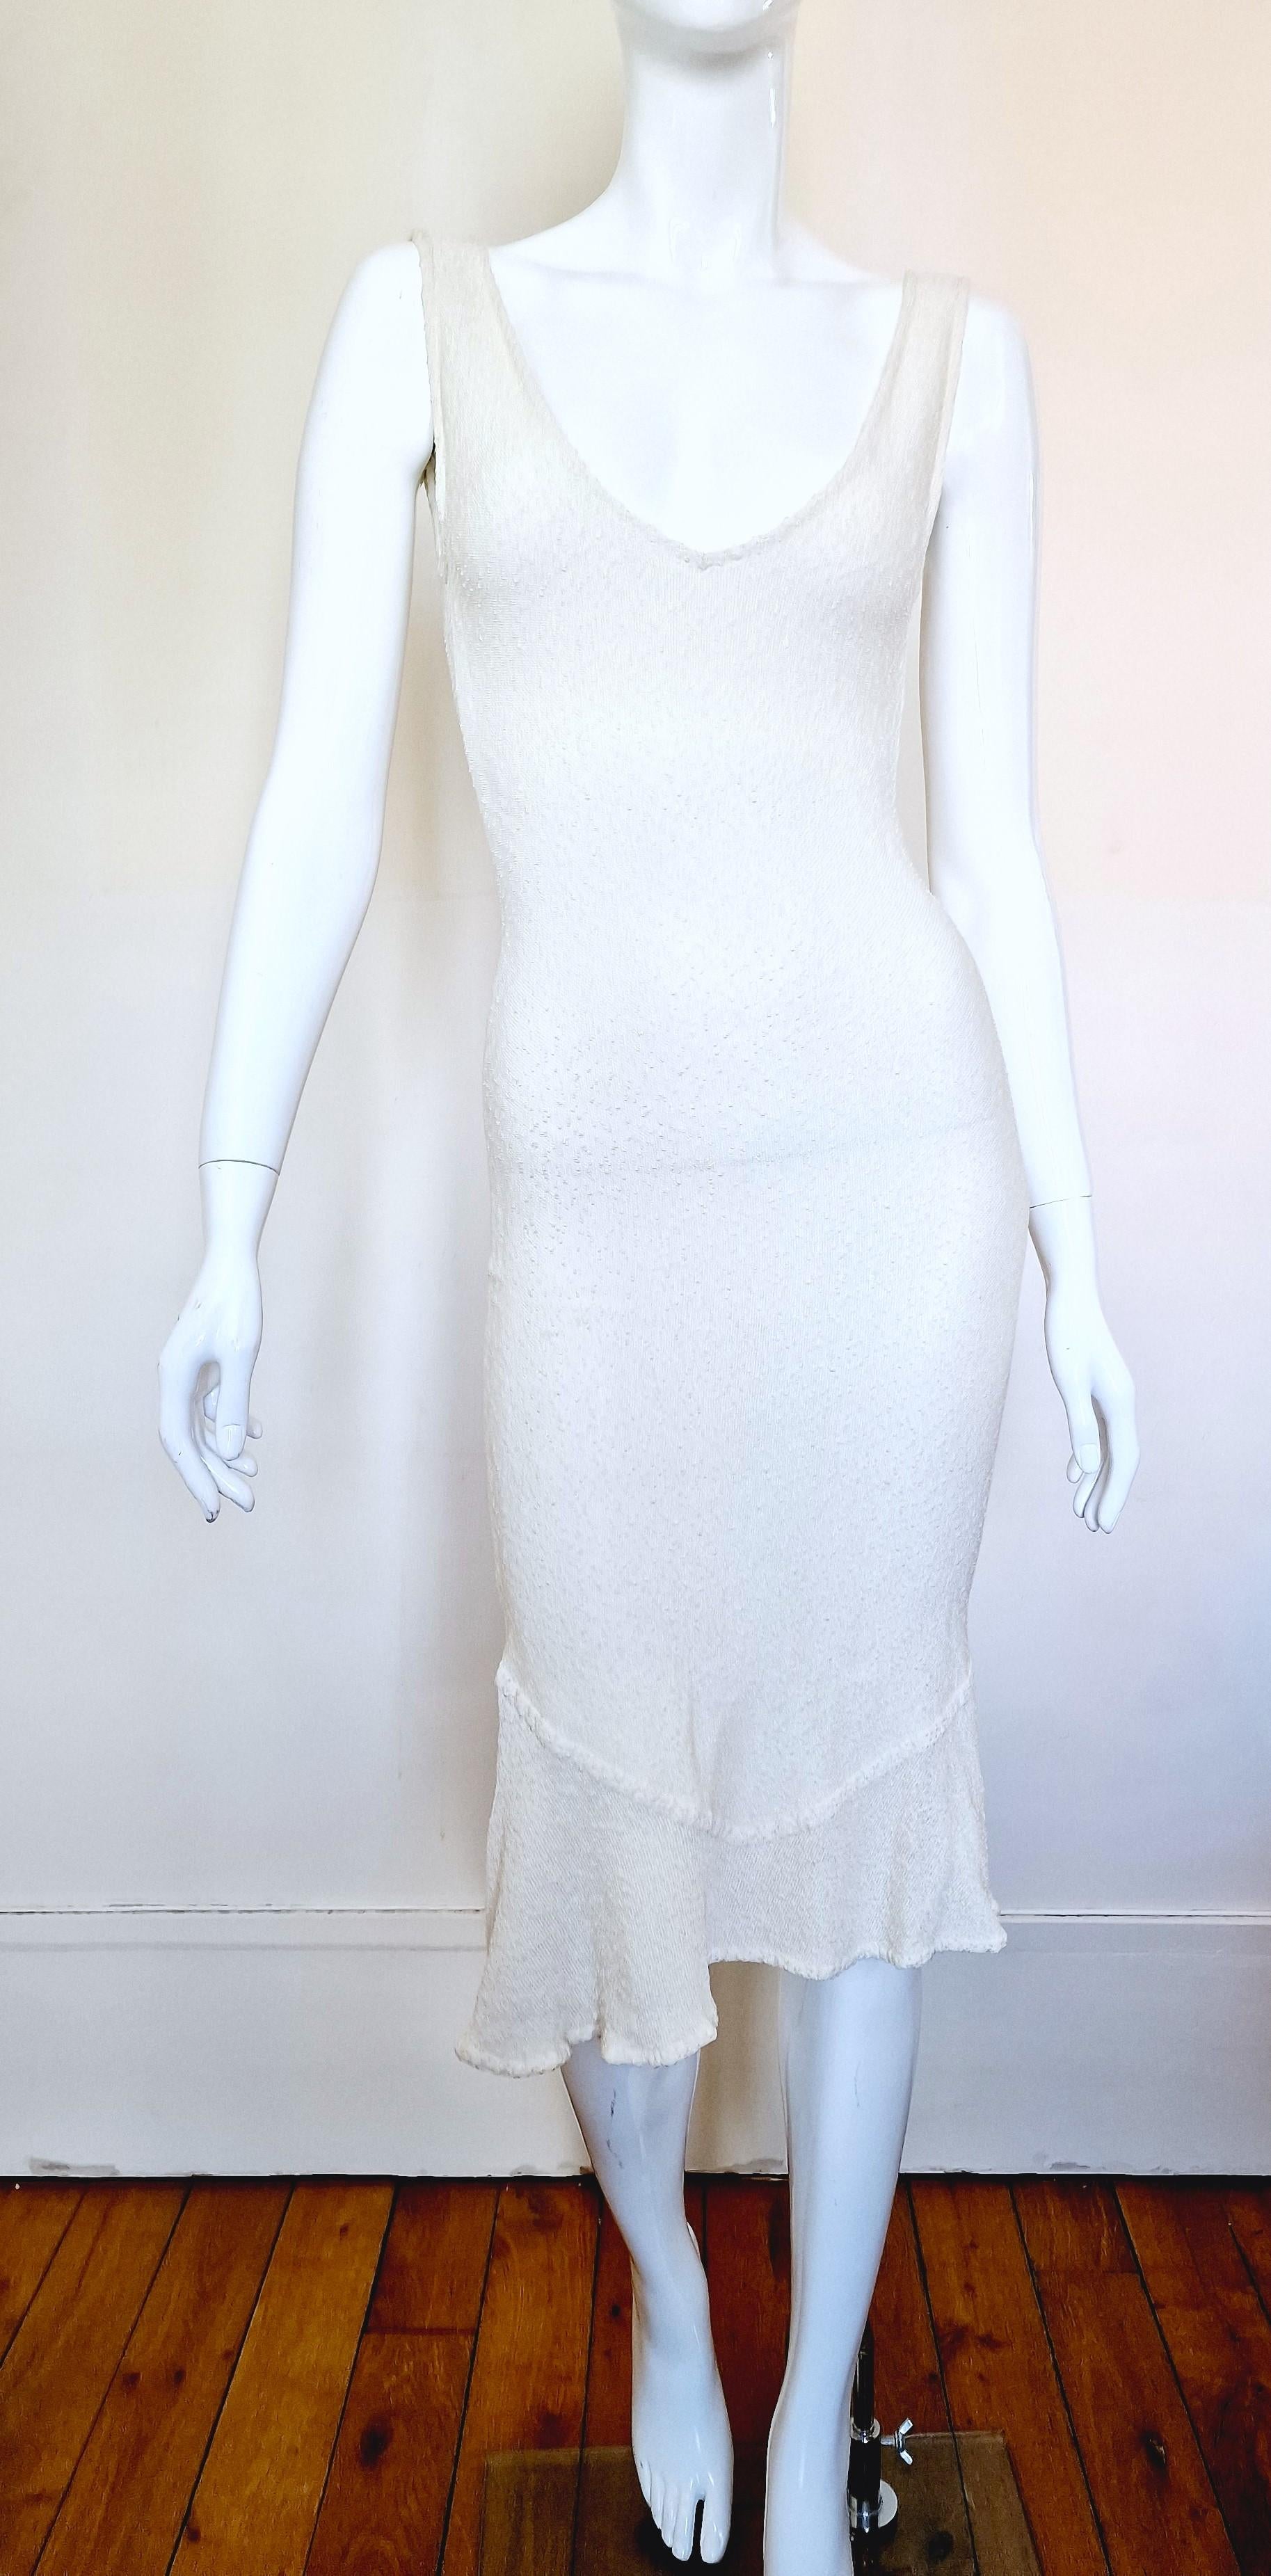 Early beautiful piece by John Galliano!
Wonderful silhouette!

LIKE NEW!

SIZE
Fits from XS to small.
Marked size: small.
Length: 104 cm / 40.9 inch
Bust: 35 cm / 13.8 inch
Waist: 30 cm / 11.8 inch
Hips: 36 cm / 14.2 inch

Made in France!
88%